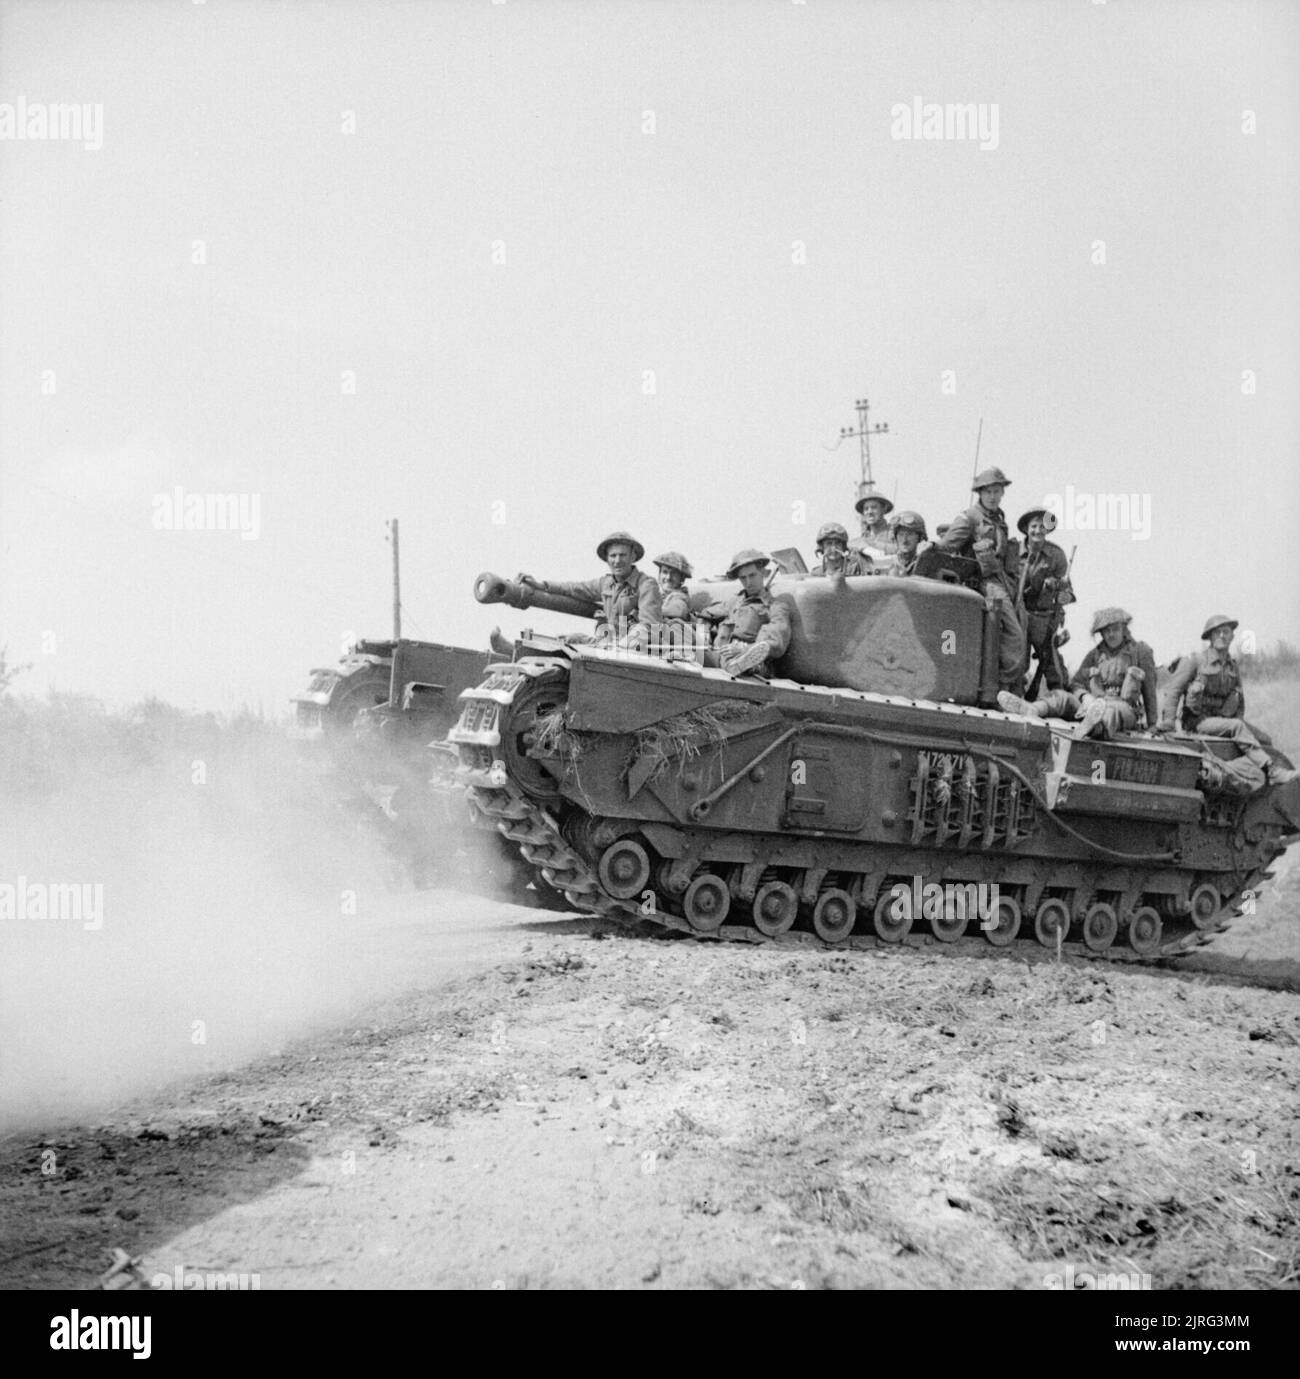 A Churchill tank carrying infantry advances towards St Pierre Tarentaine, Normandy, 3 August 1944. Churchill tank carrying infantry advance towards St Pierre Tarentaine, 3 August 1944. Stock Photo